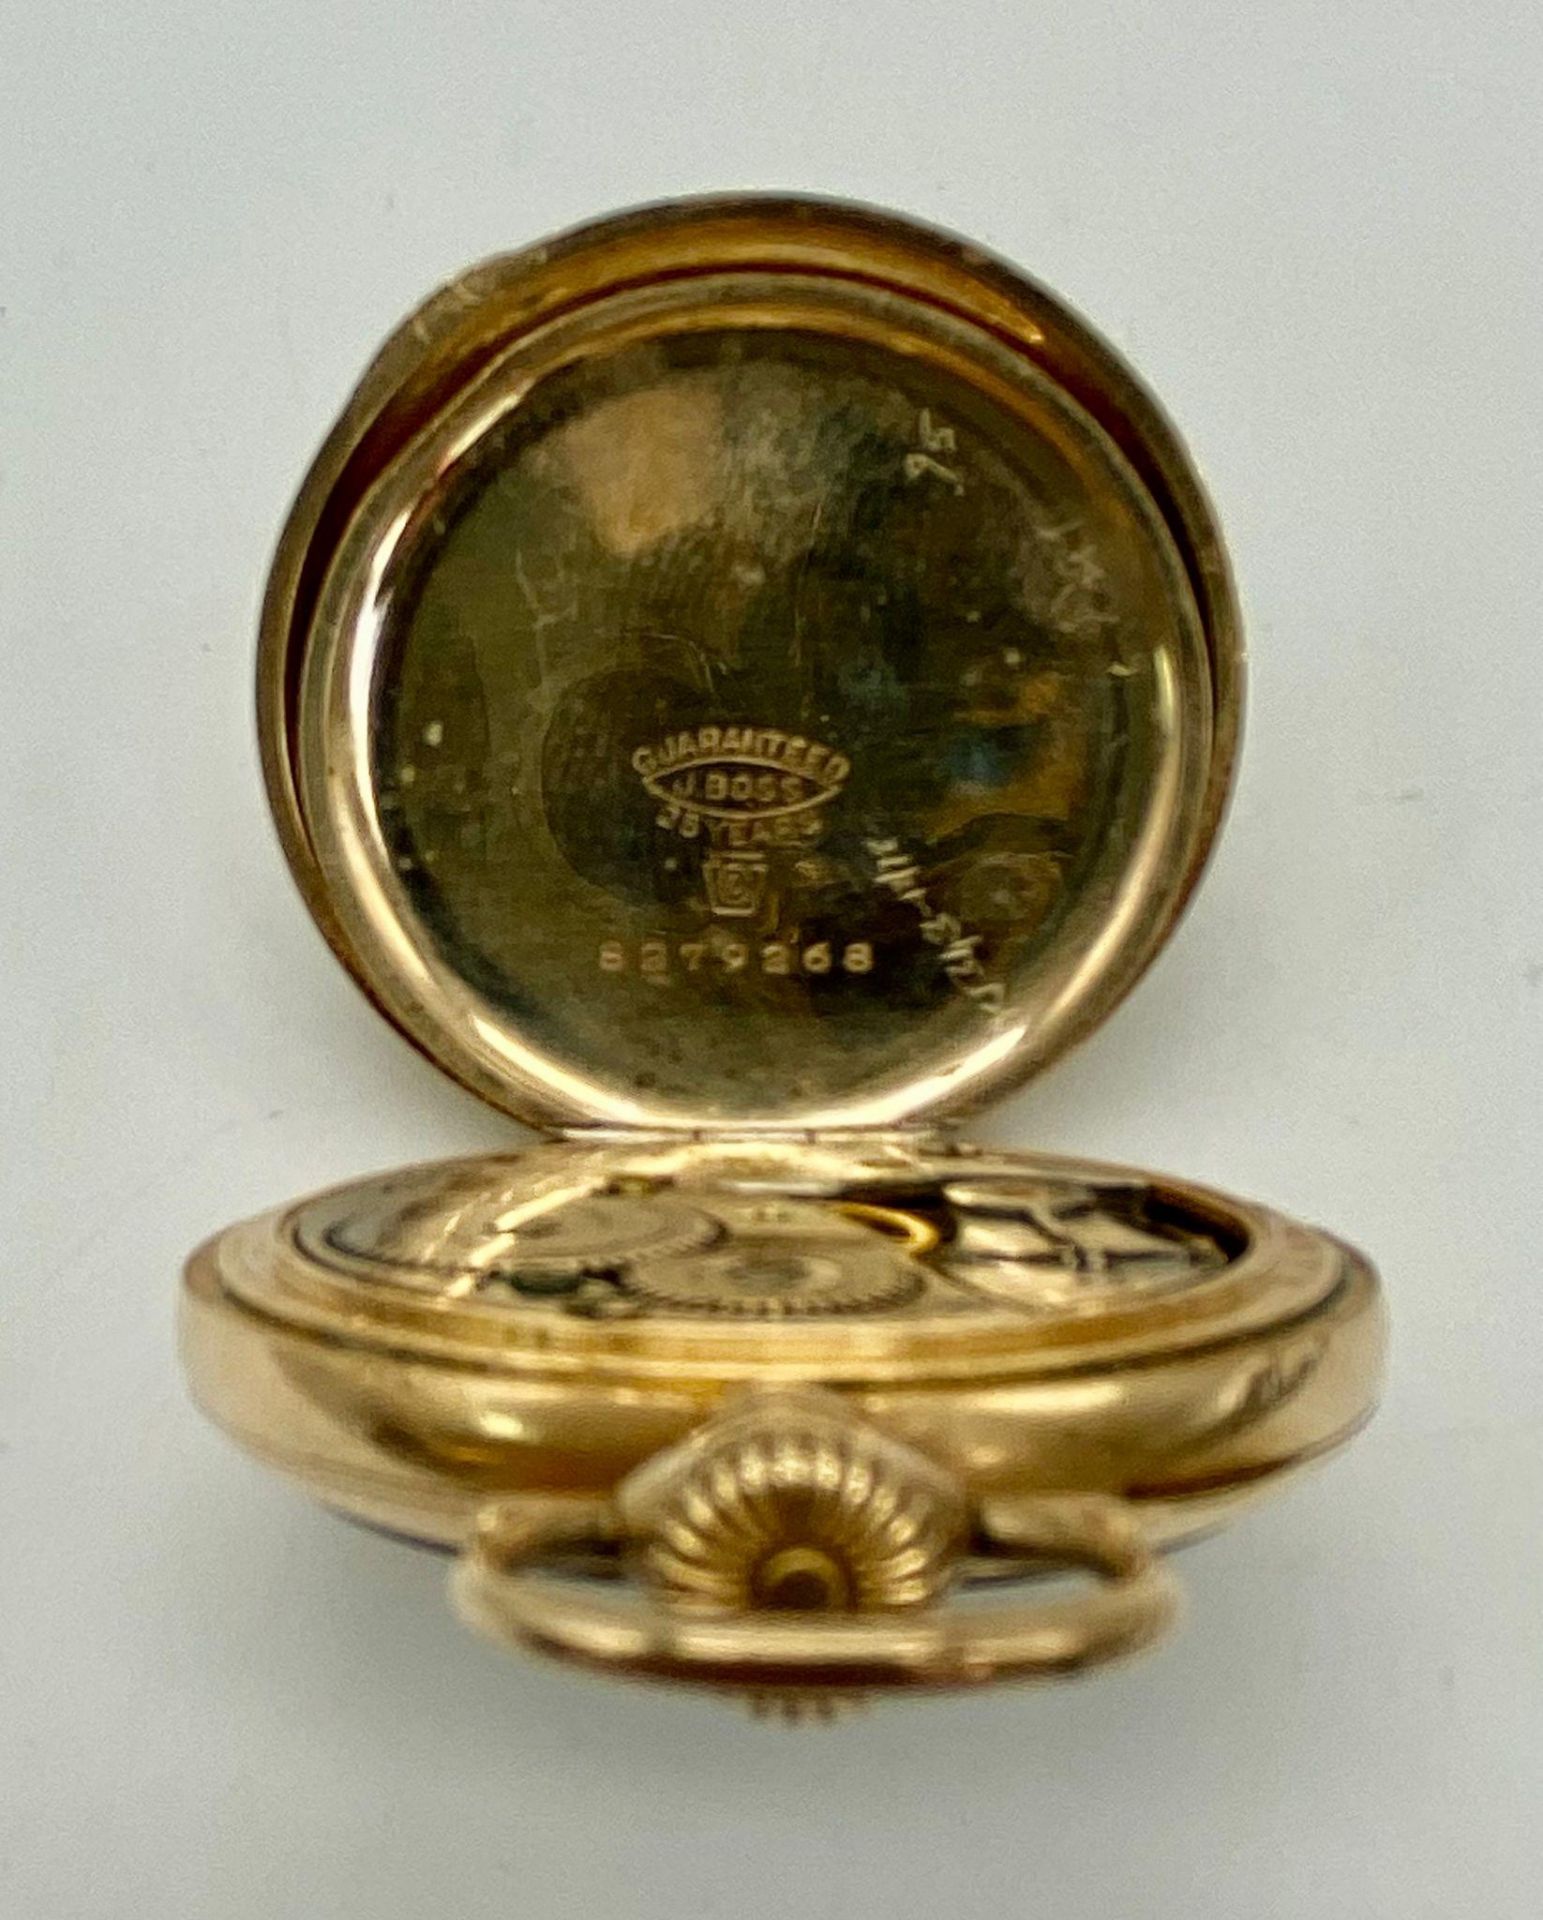 An Antique (1912) Small Elgin Gold Plated Pocket Watch. 15 jewels. 16578165 movement. Top winder. - Image 4 of 5